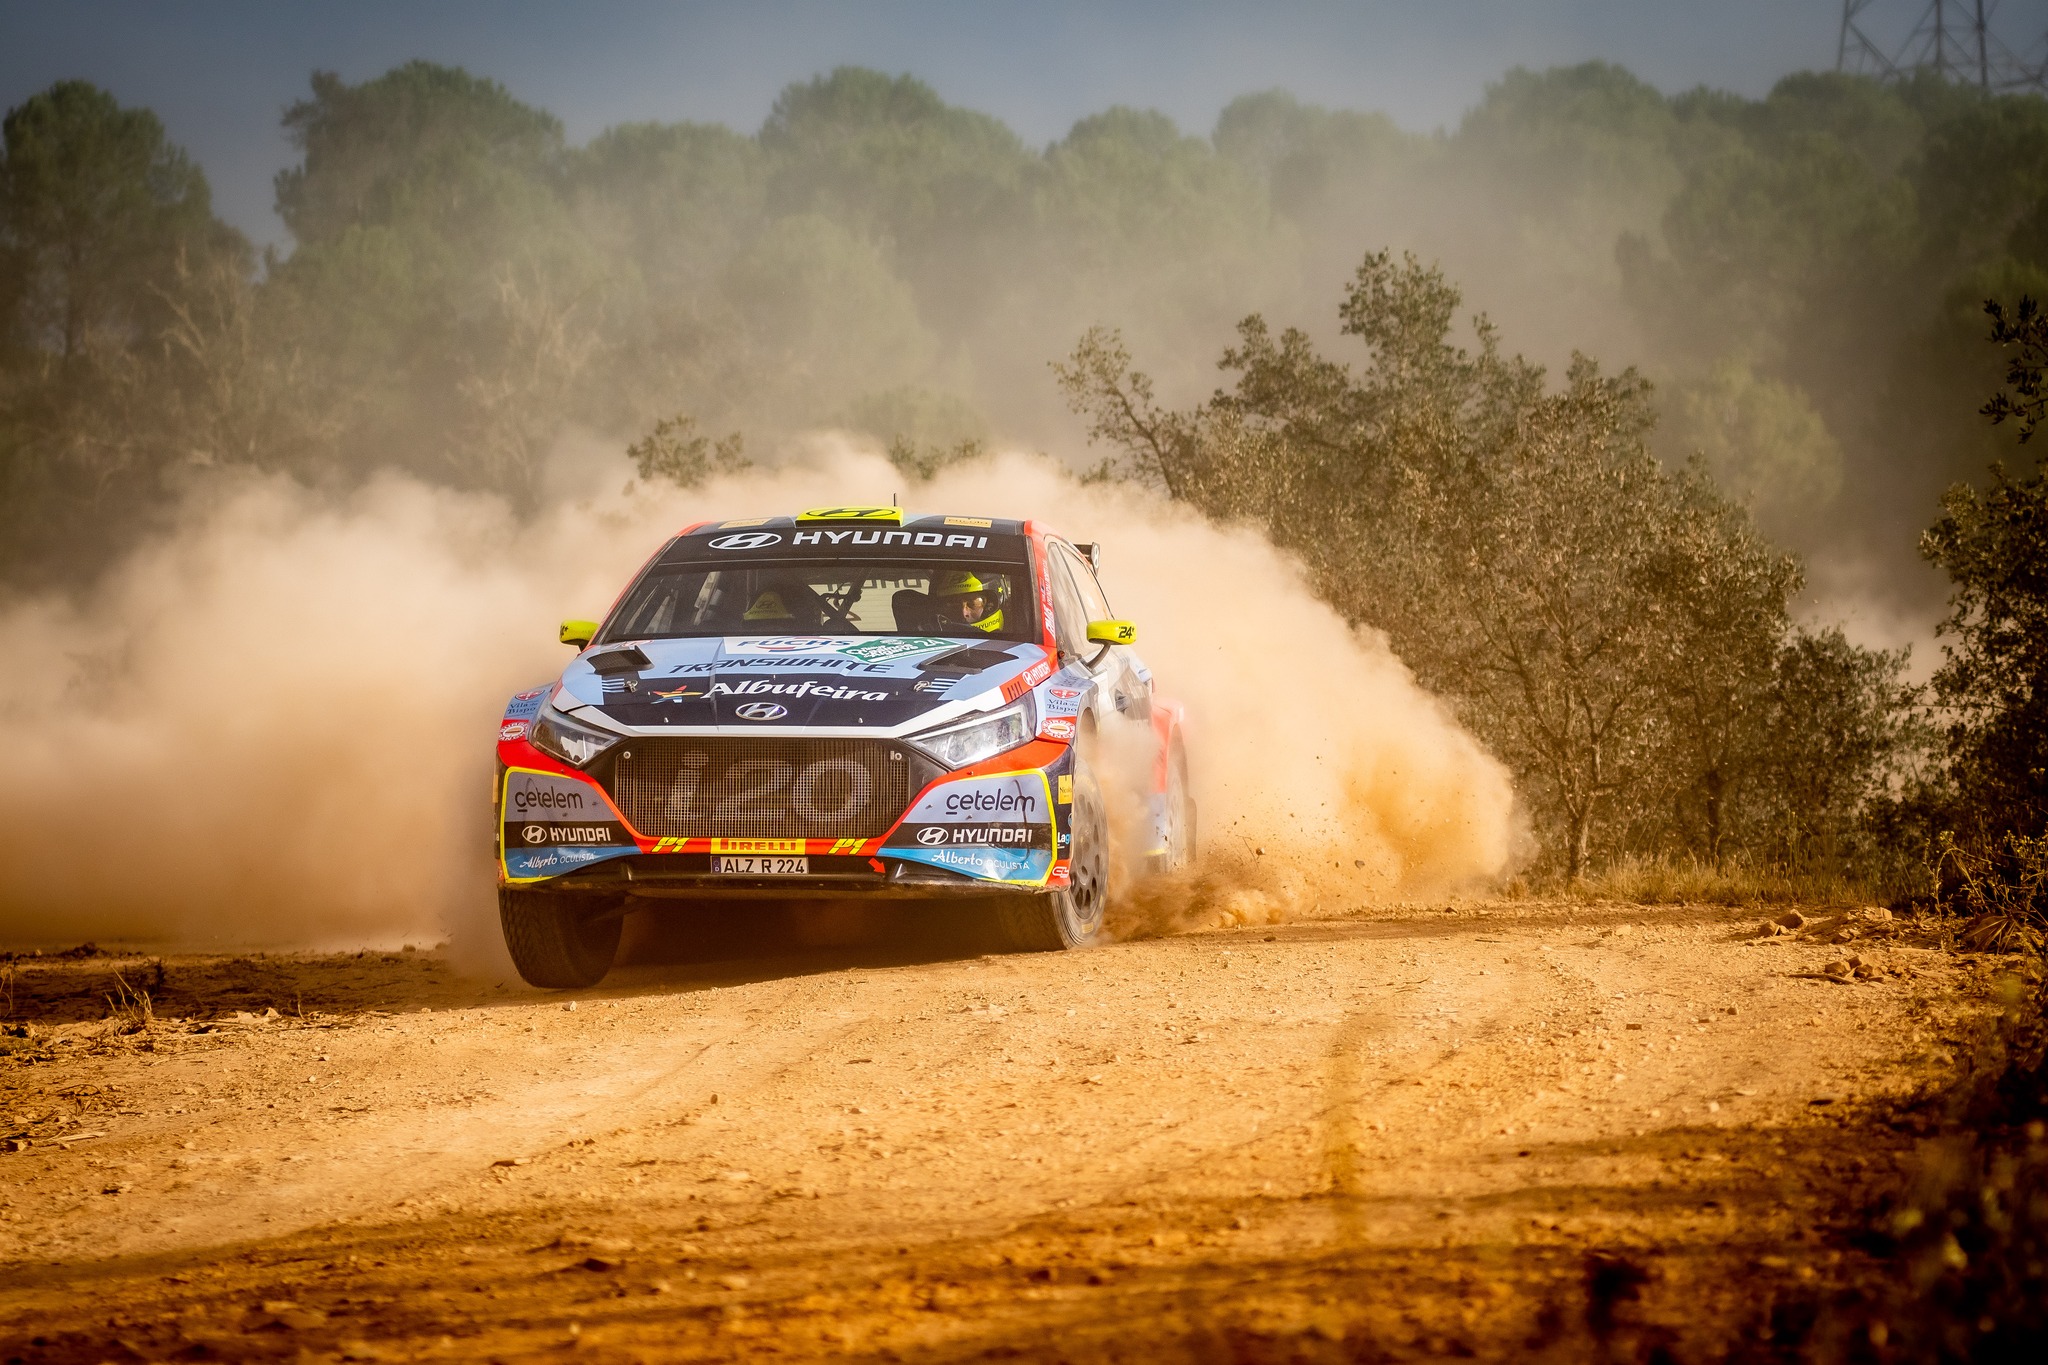 CPR, Algarve Rally: PE 8 and PE 9 cancelled